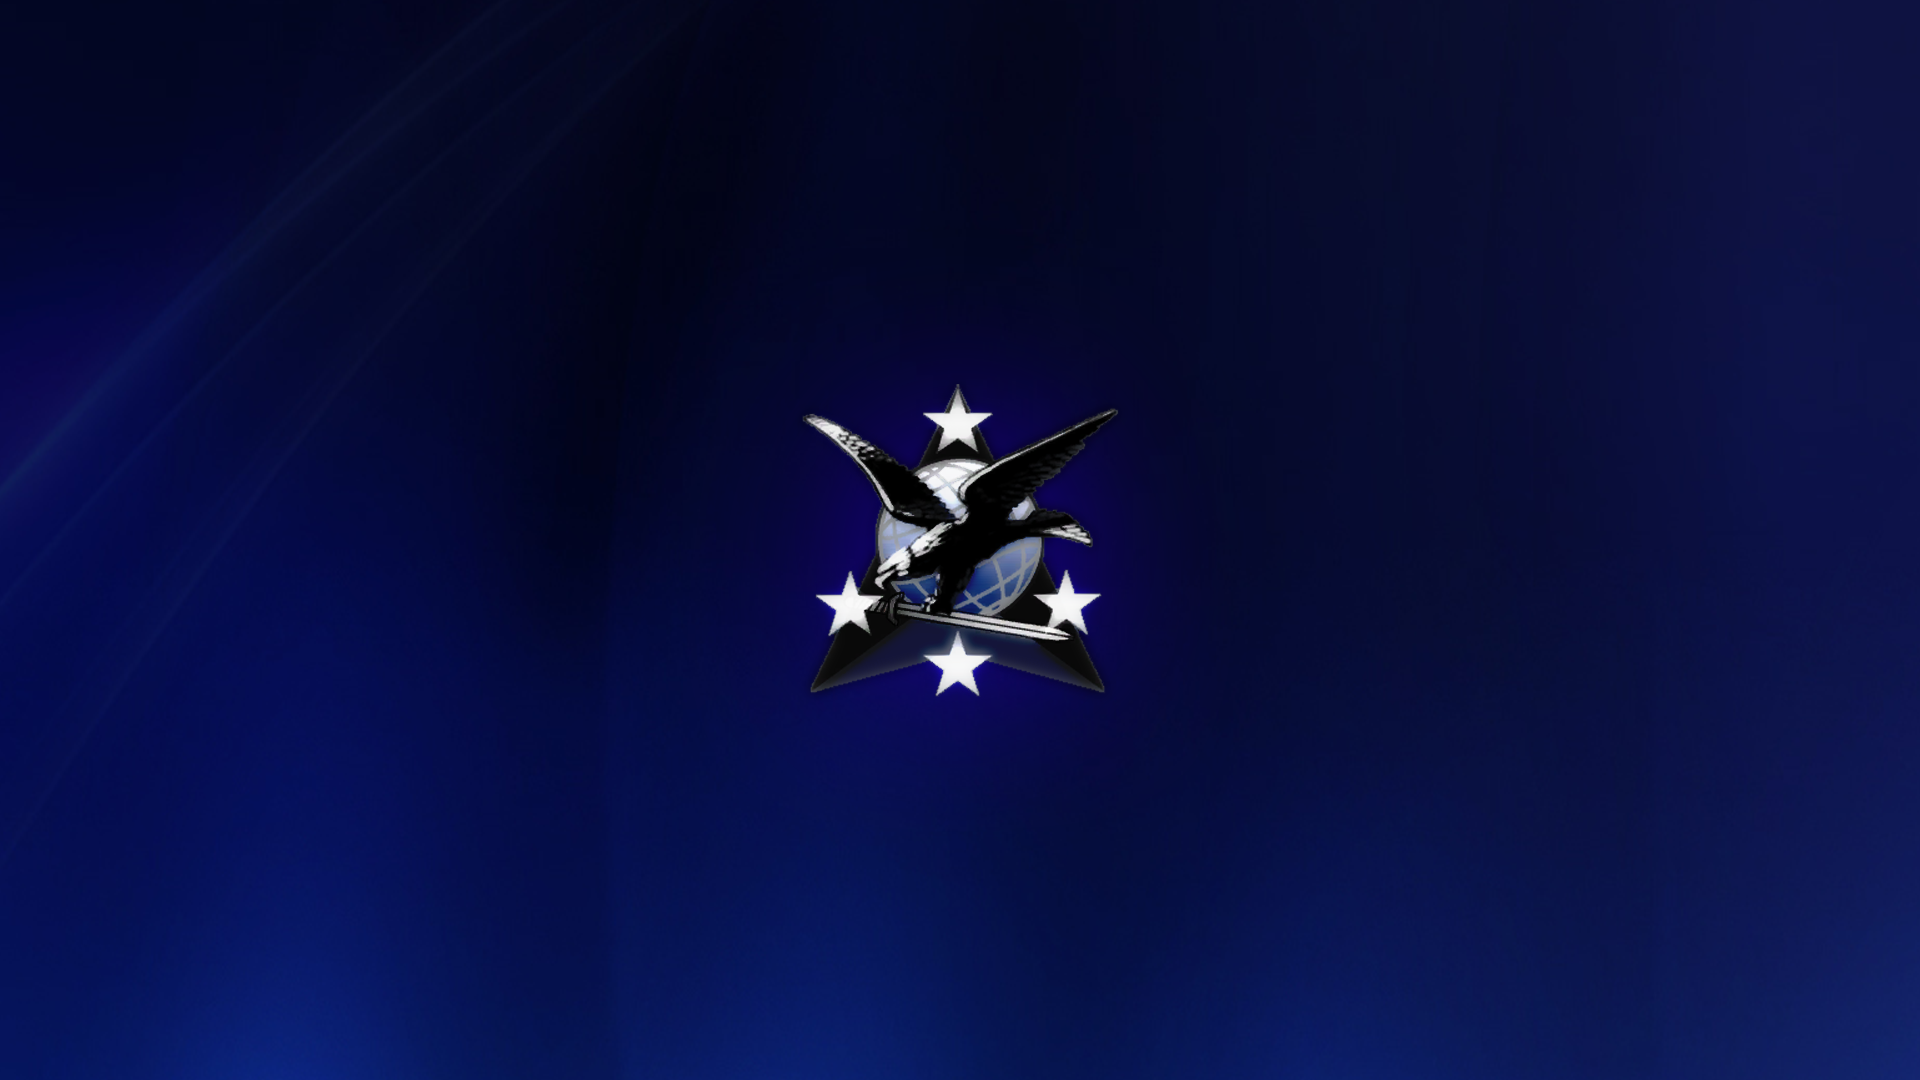 United States Navy iPhone Wallpaper